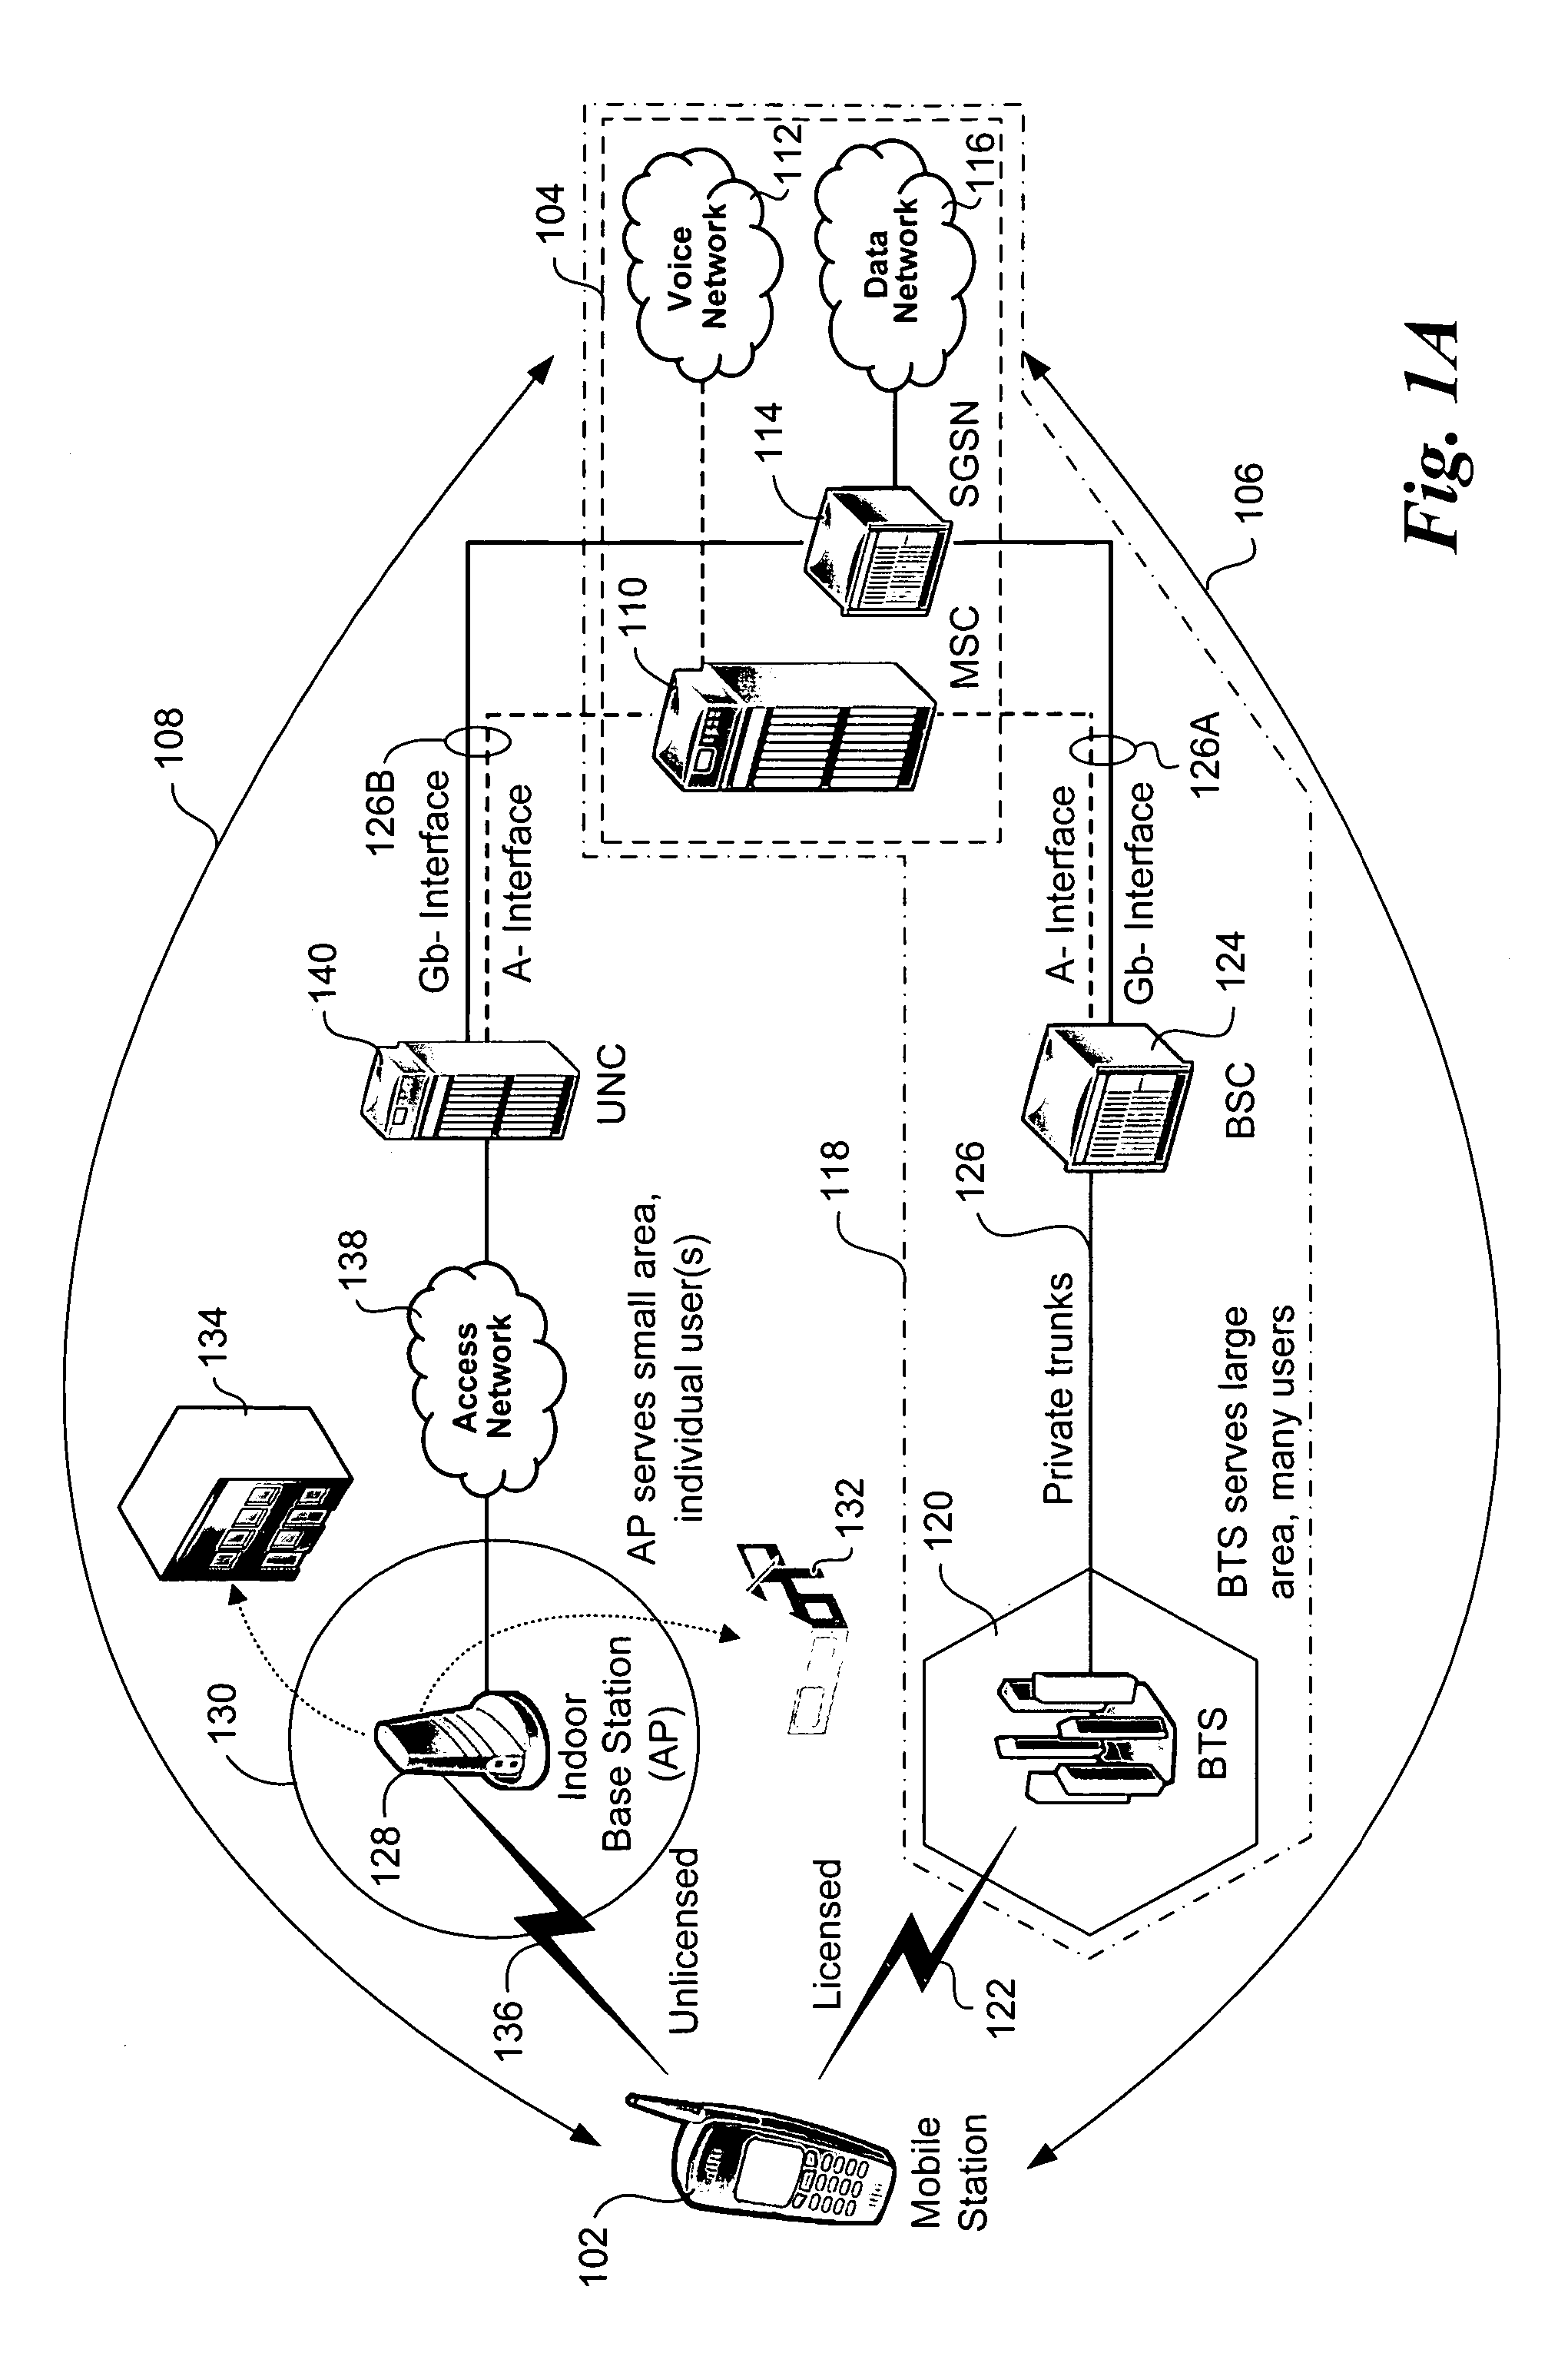 Method and system for determining the location of an unlicensed mobile access subscriber